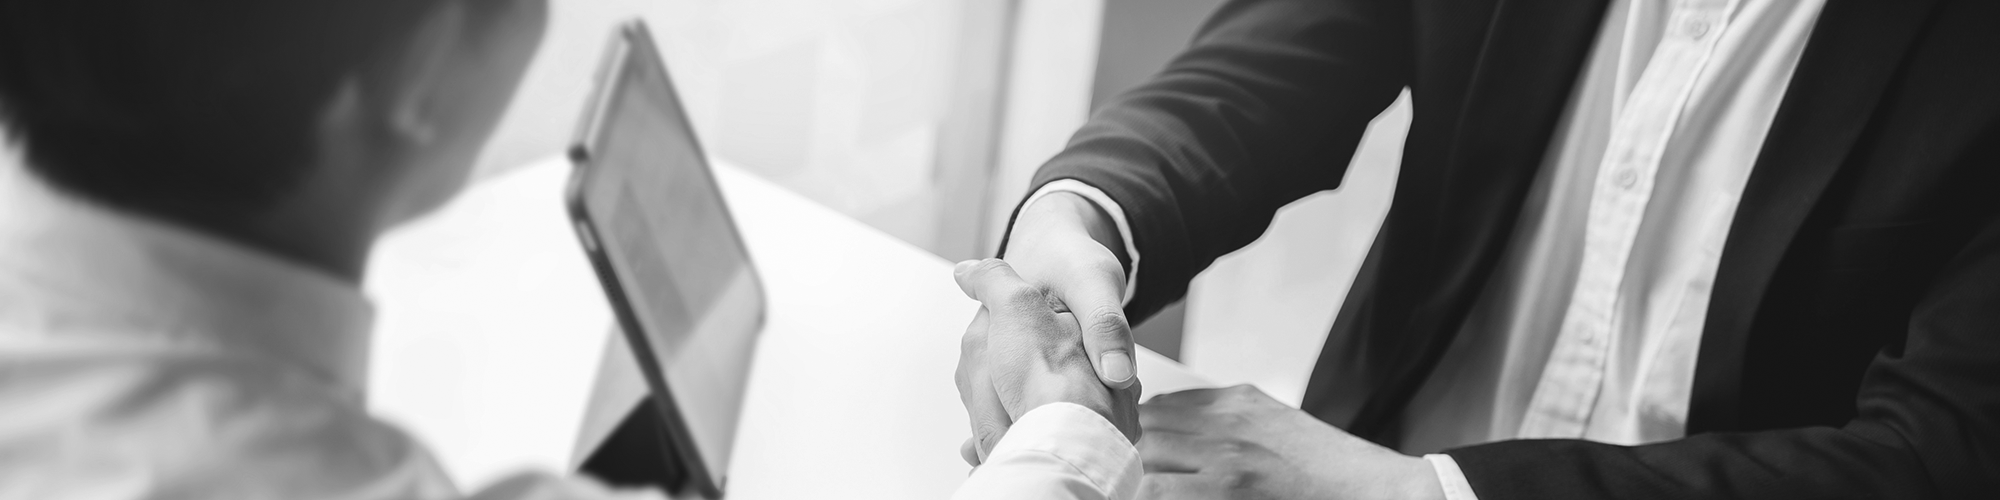 Two people shaking hands in an office setting